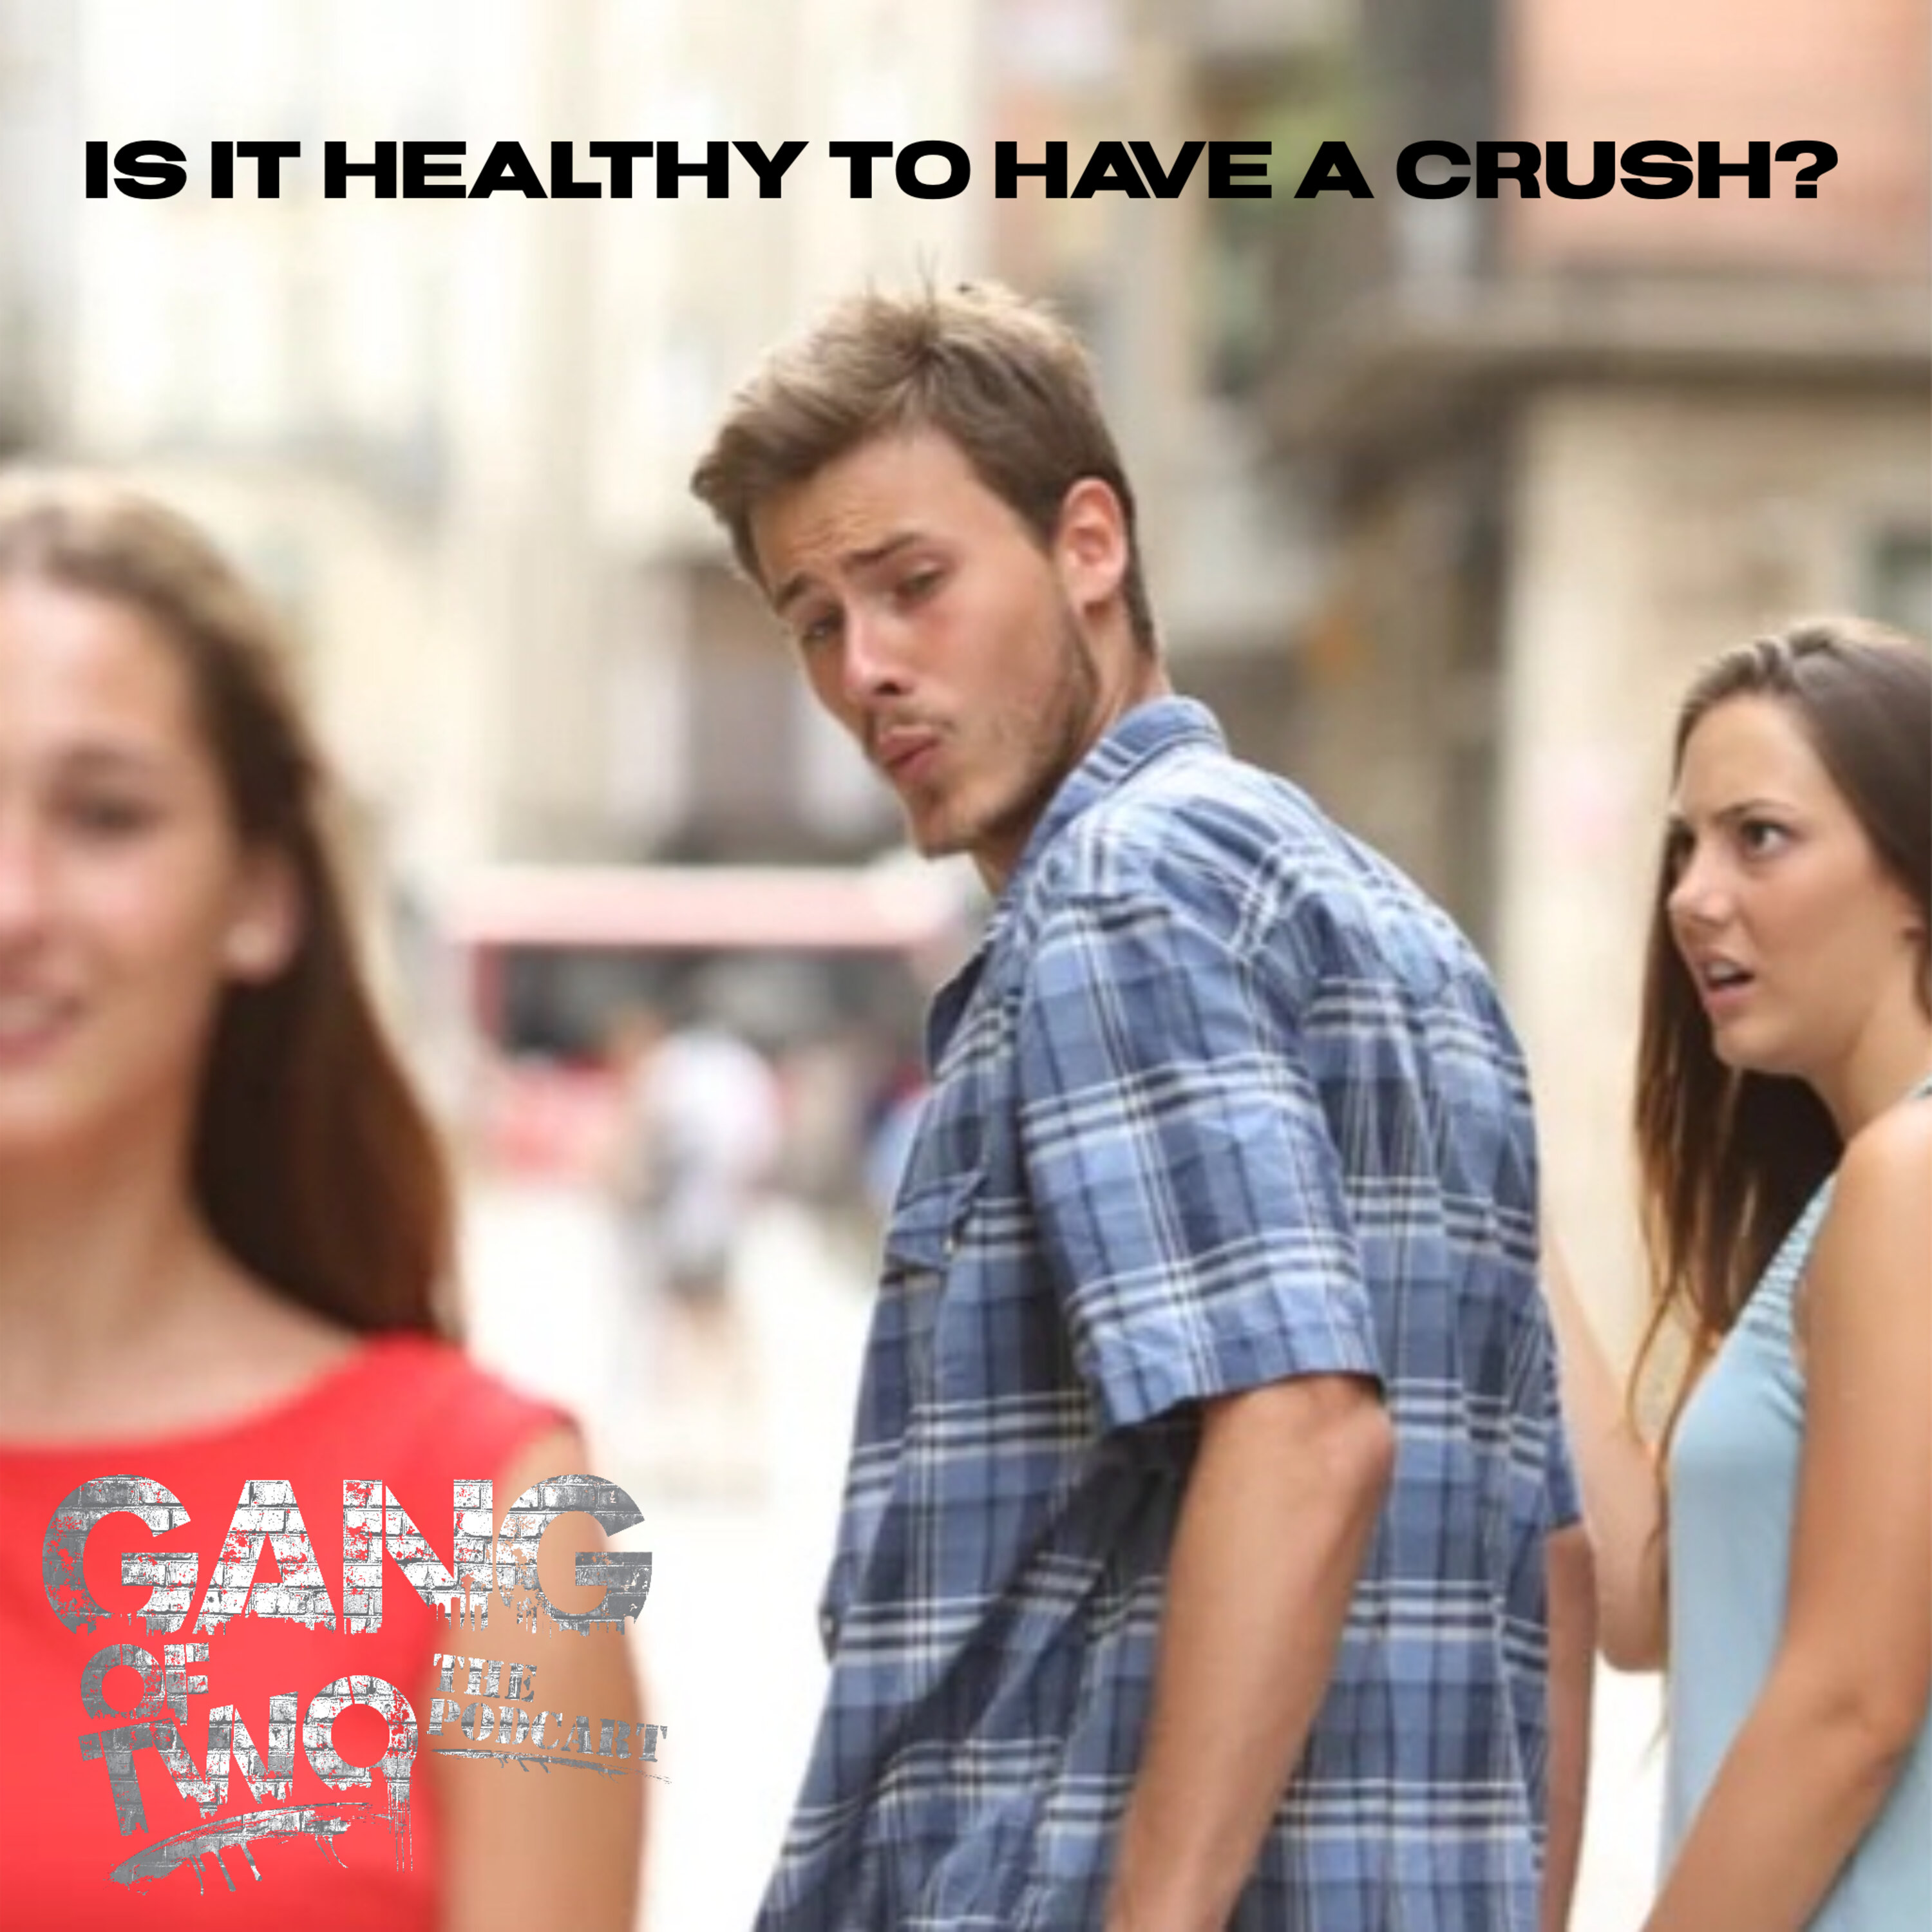 IS IT HEALTHY TO HAVE A CRUSH WHILE YOU'RE IN A RELATIONSHIP? Image